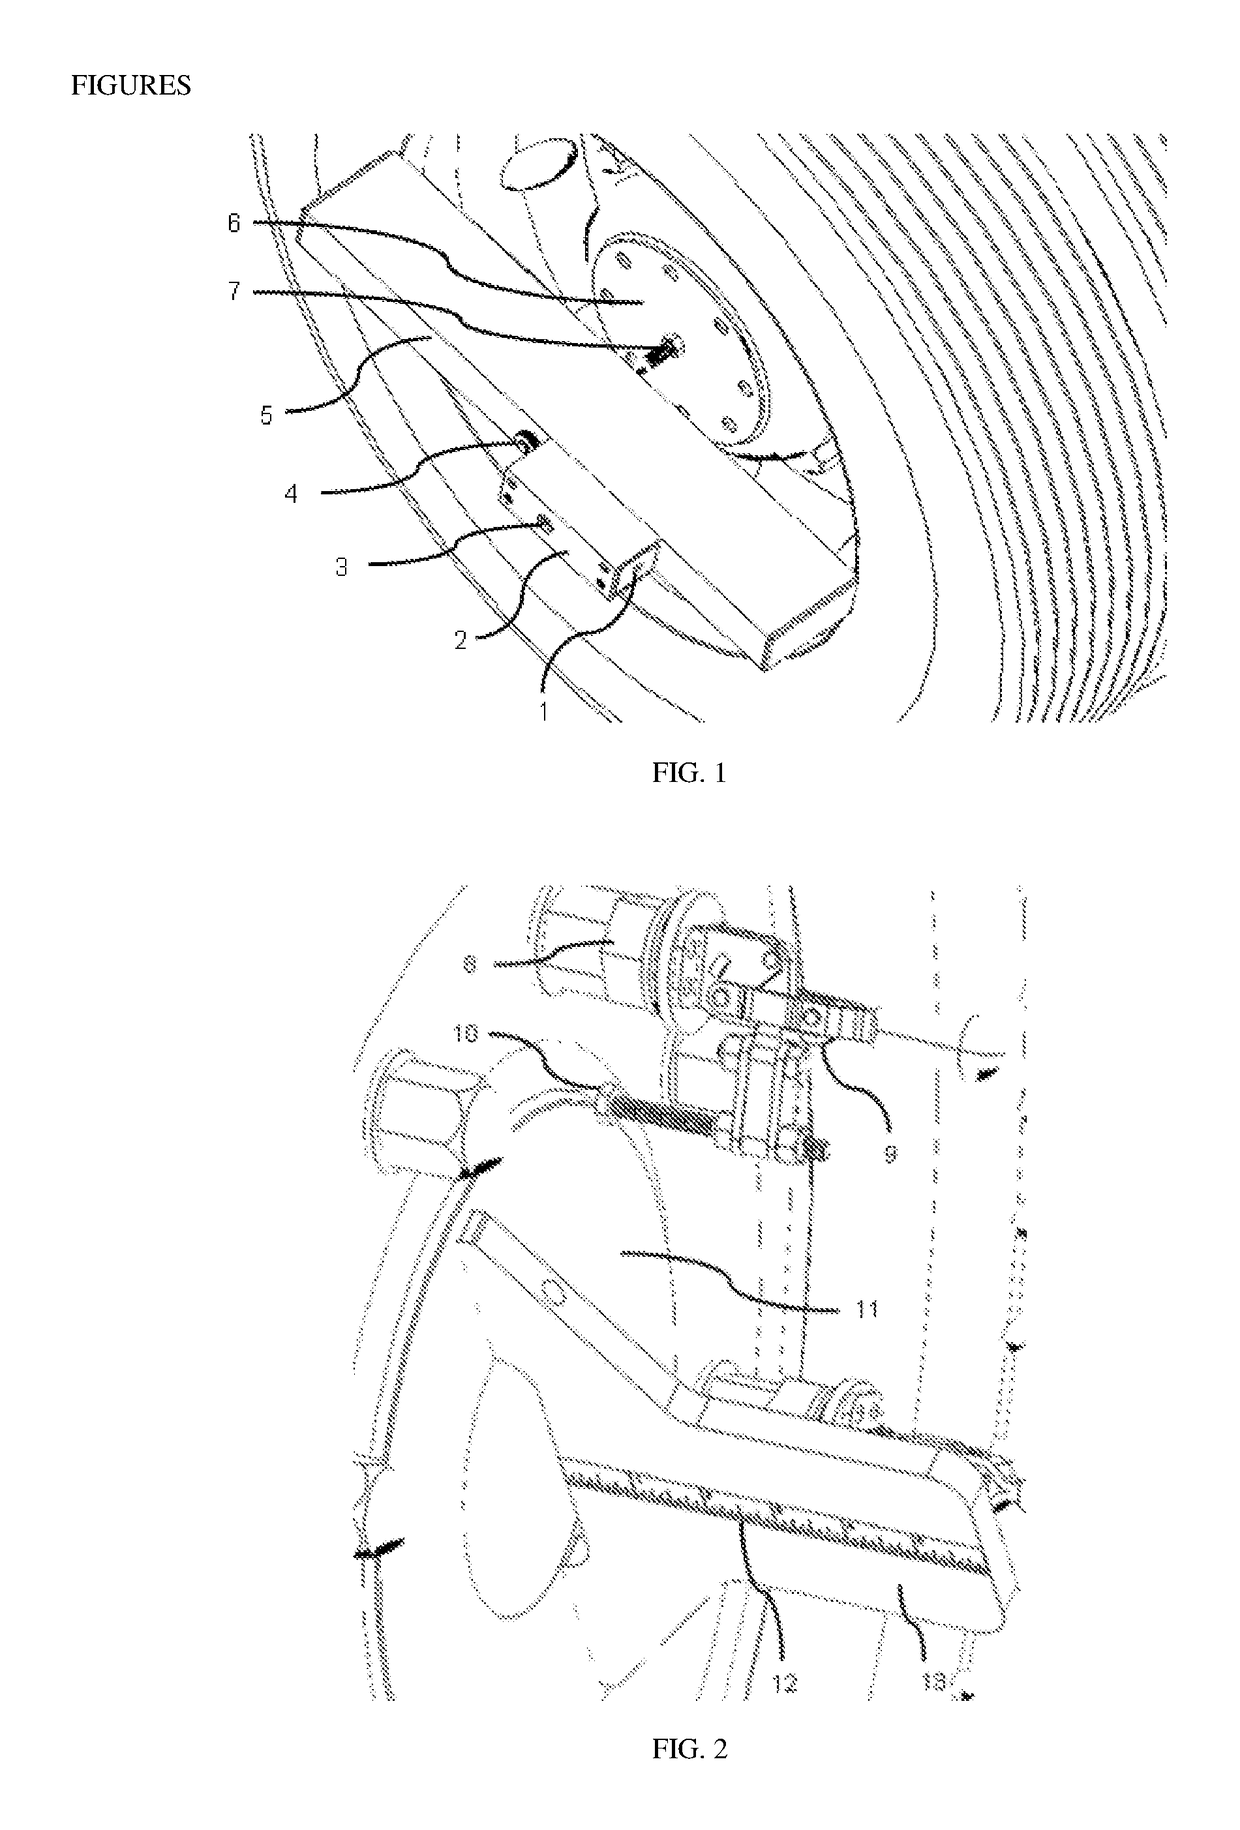 Portable axle alignment apparatus and method